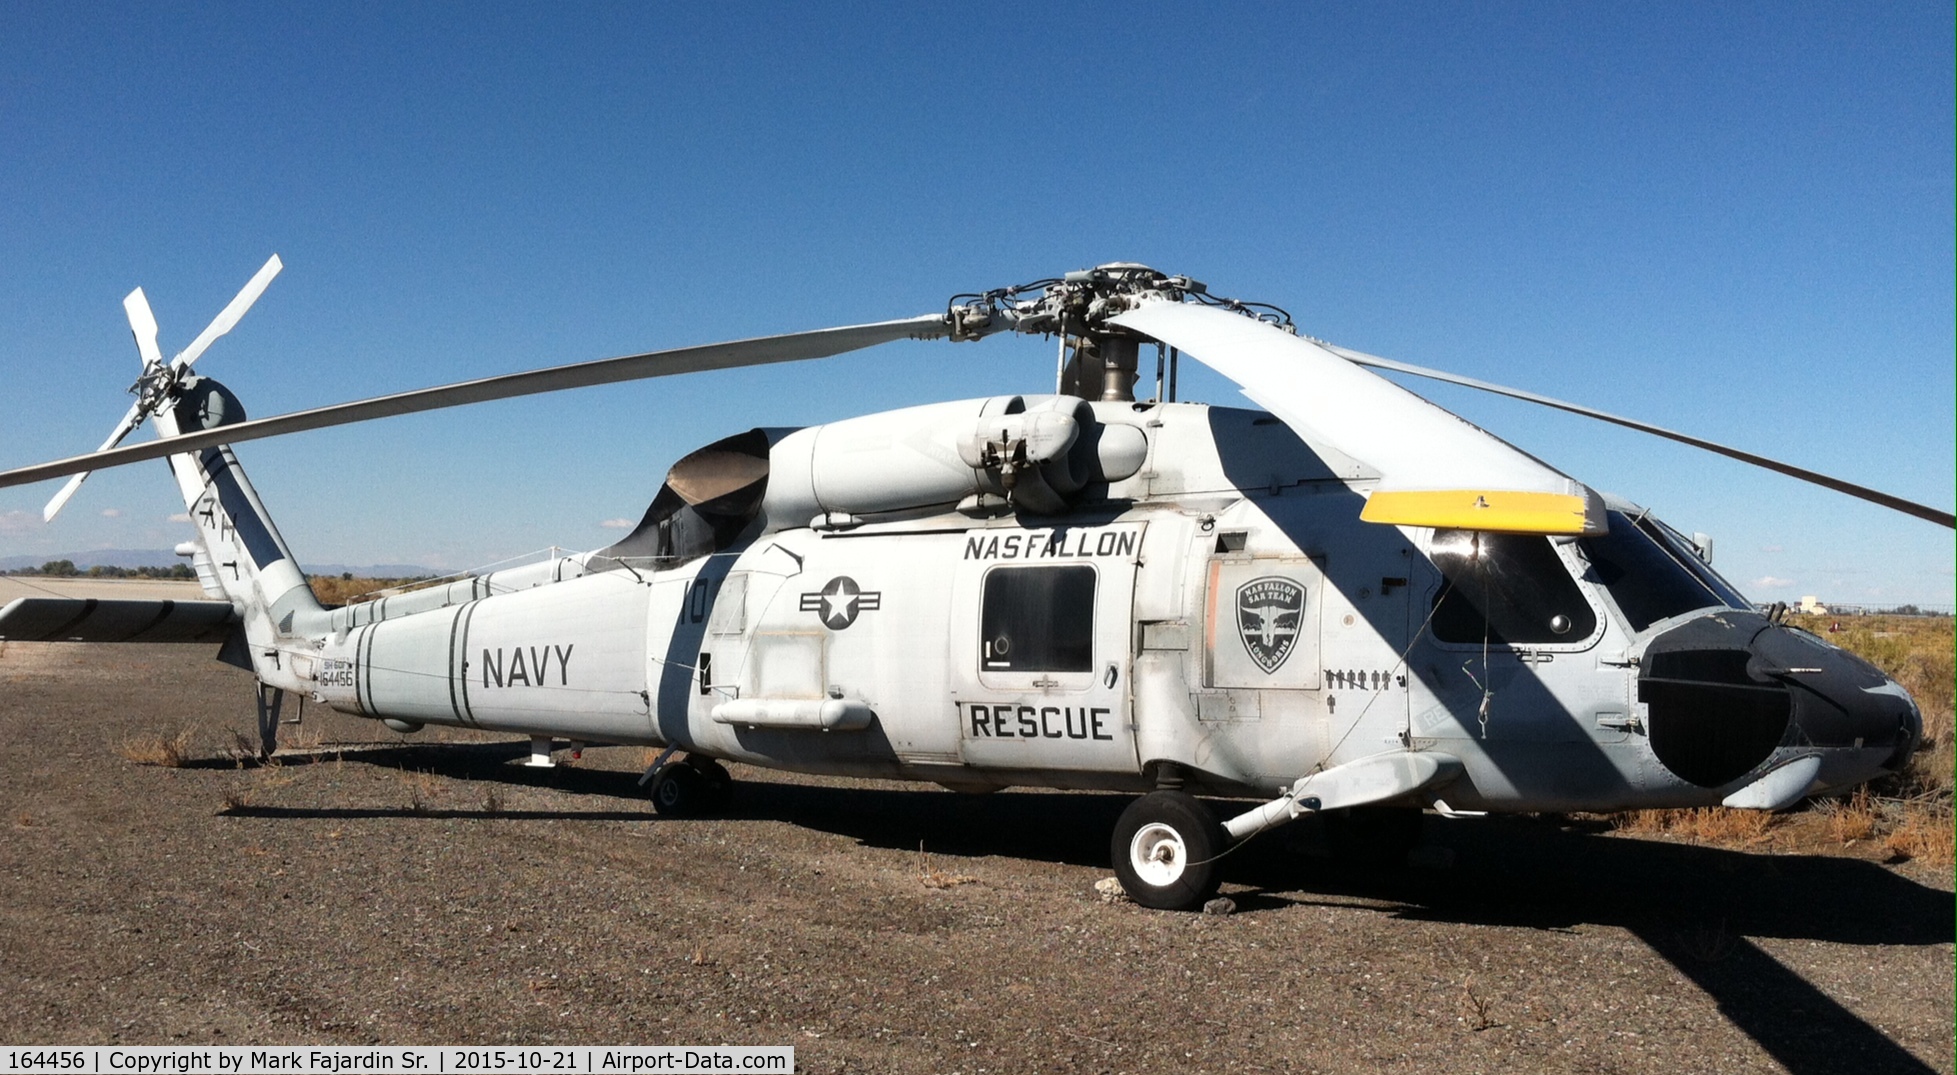 164456, Sikorsky SH-60F Ocean Hawk C/N 70.1693, Taken in October 2015 during a survey inspection by the Director of Aircraft Acquisitions Mark Fajardin Sr. prior to transfer for the Pacific Coast Air Museum. This helo was going to go into Fallon's air park but Fallon will induct an HH-60 instead.